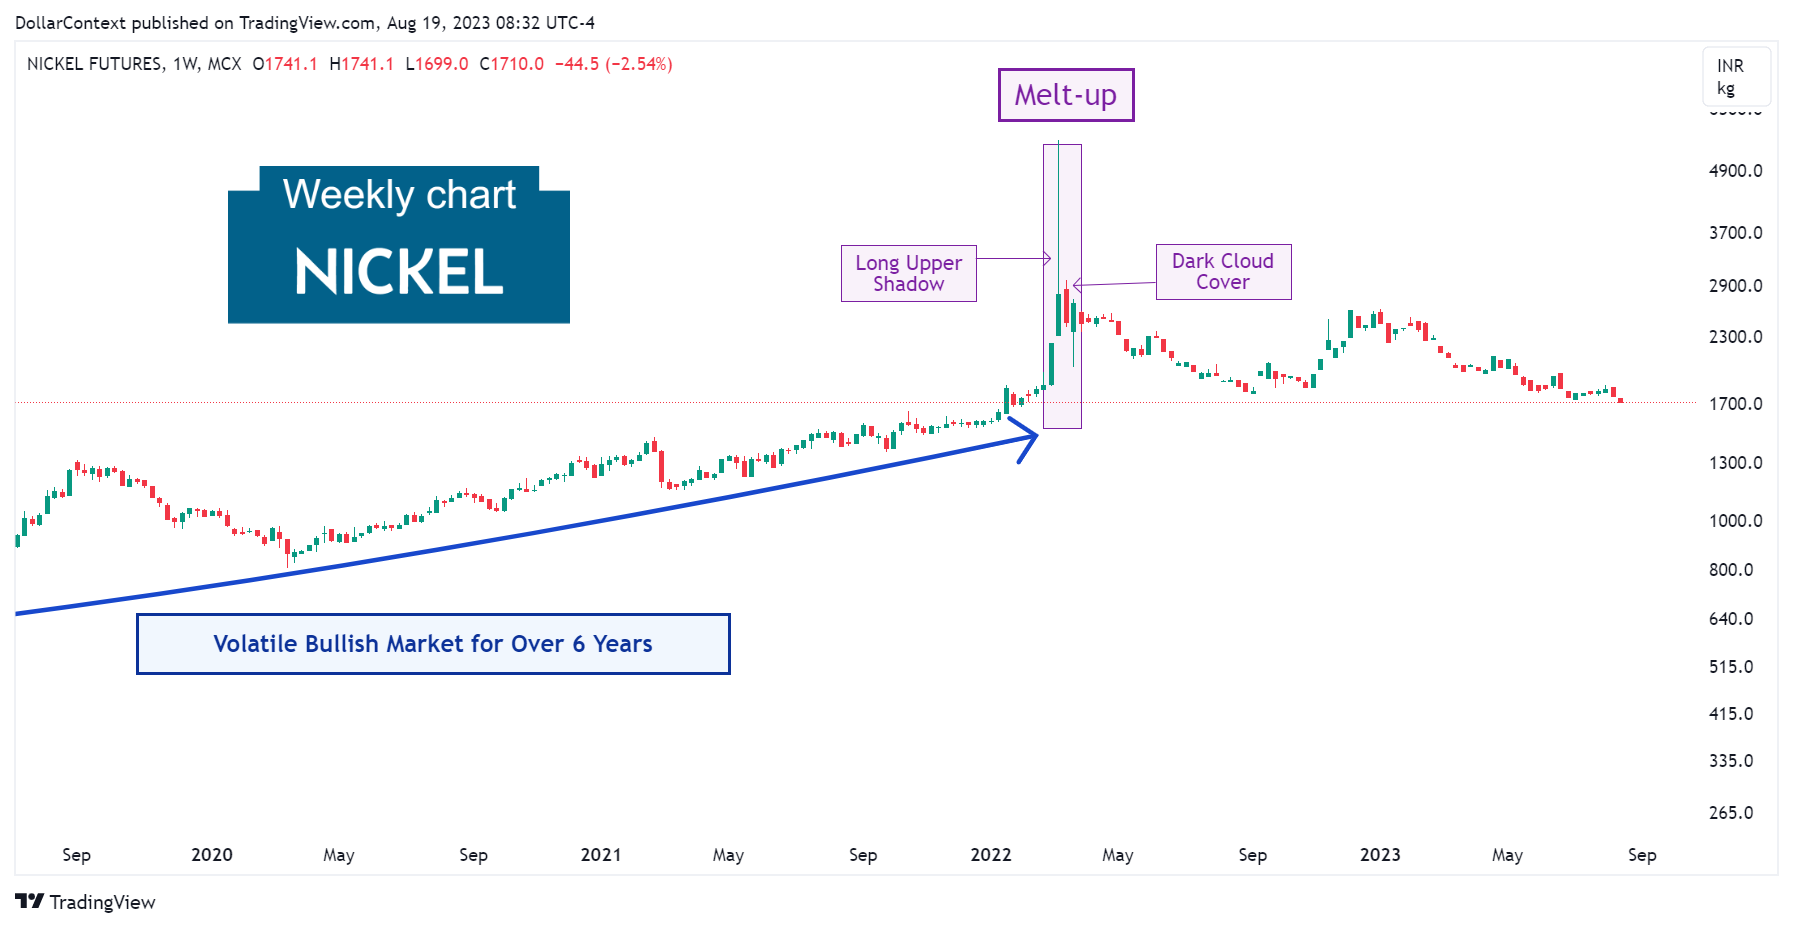 Nickel Futures: Extreme Spike in March 2022 (Weekly Chart)